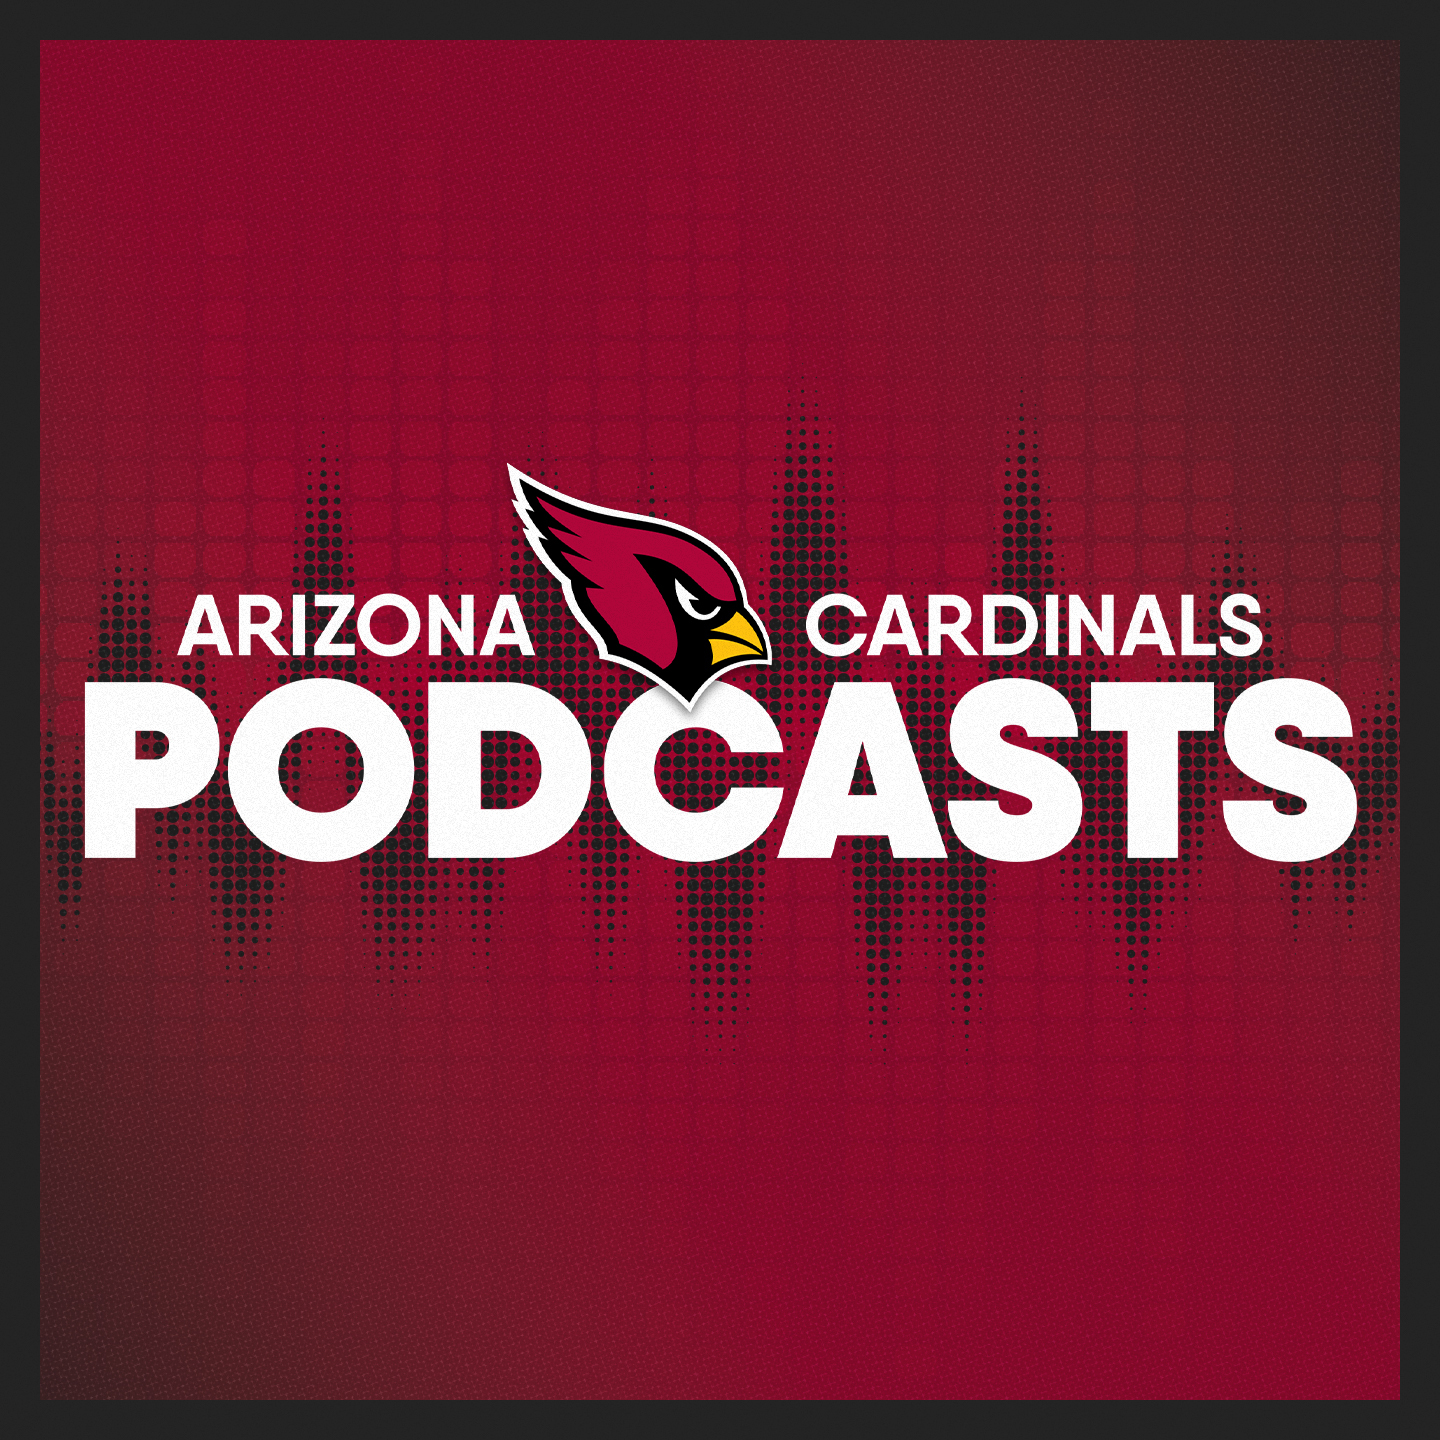 Cardinals Cover 2 - Does Playoff Experience Matter?